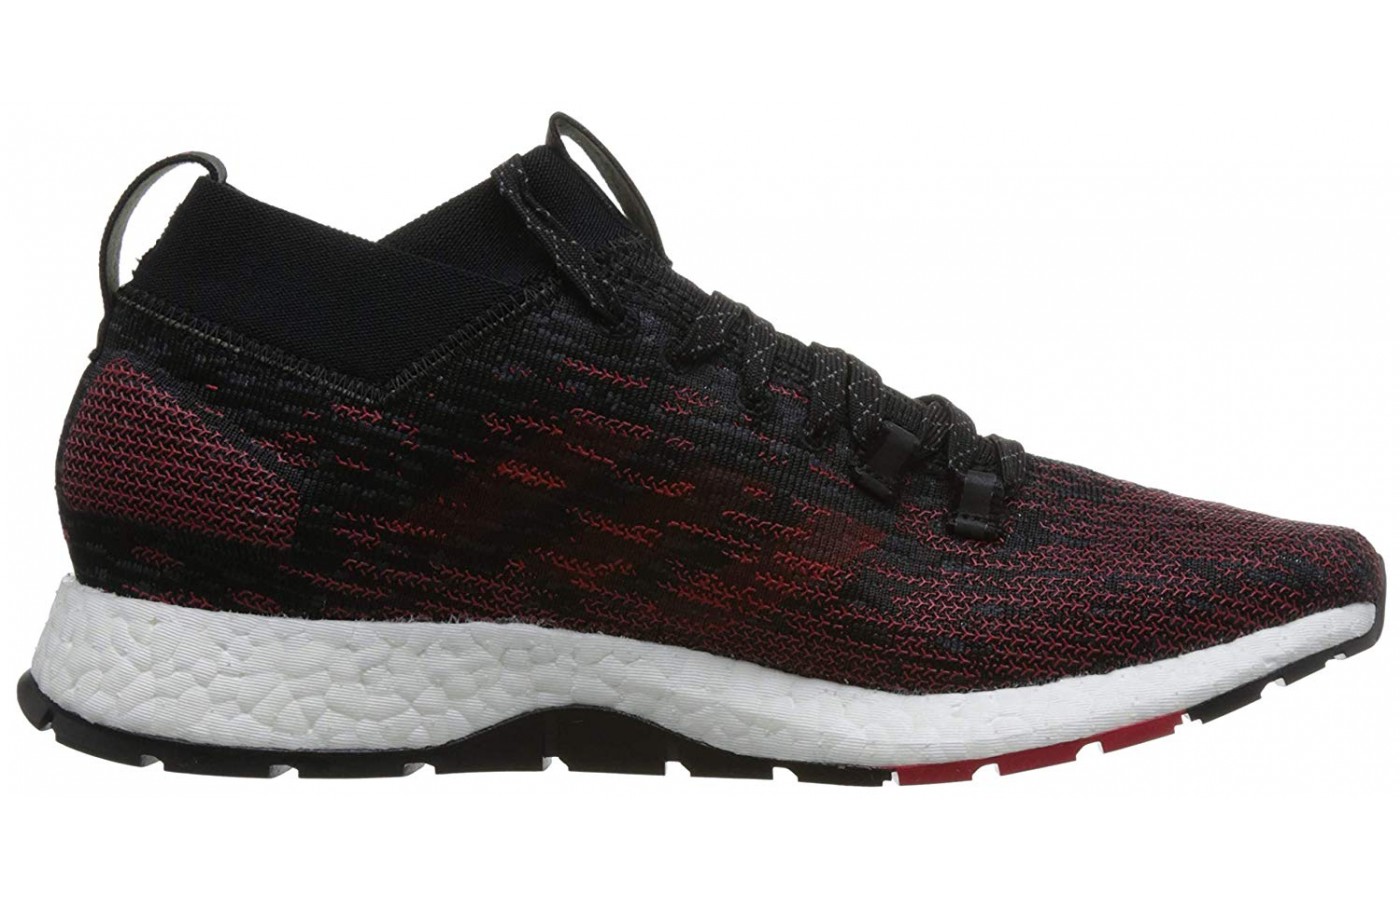 Adidas Pureboost RBL from the right